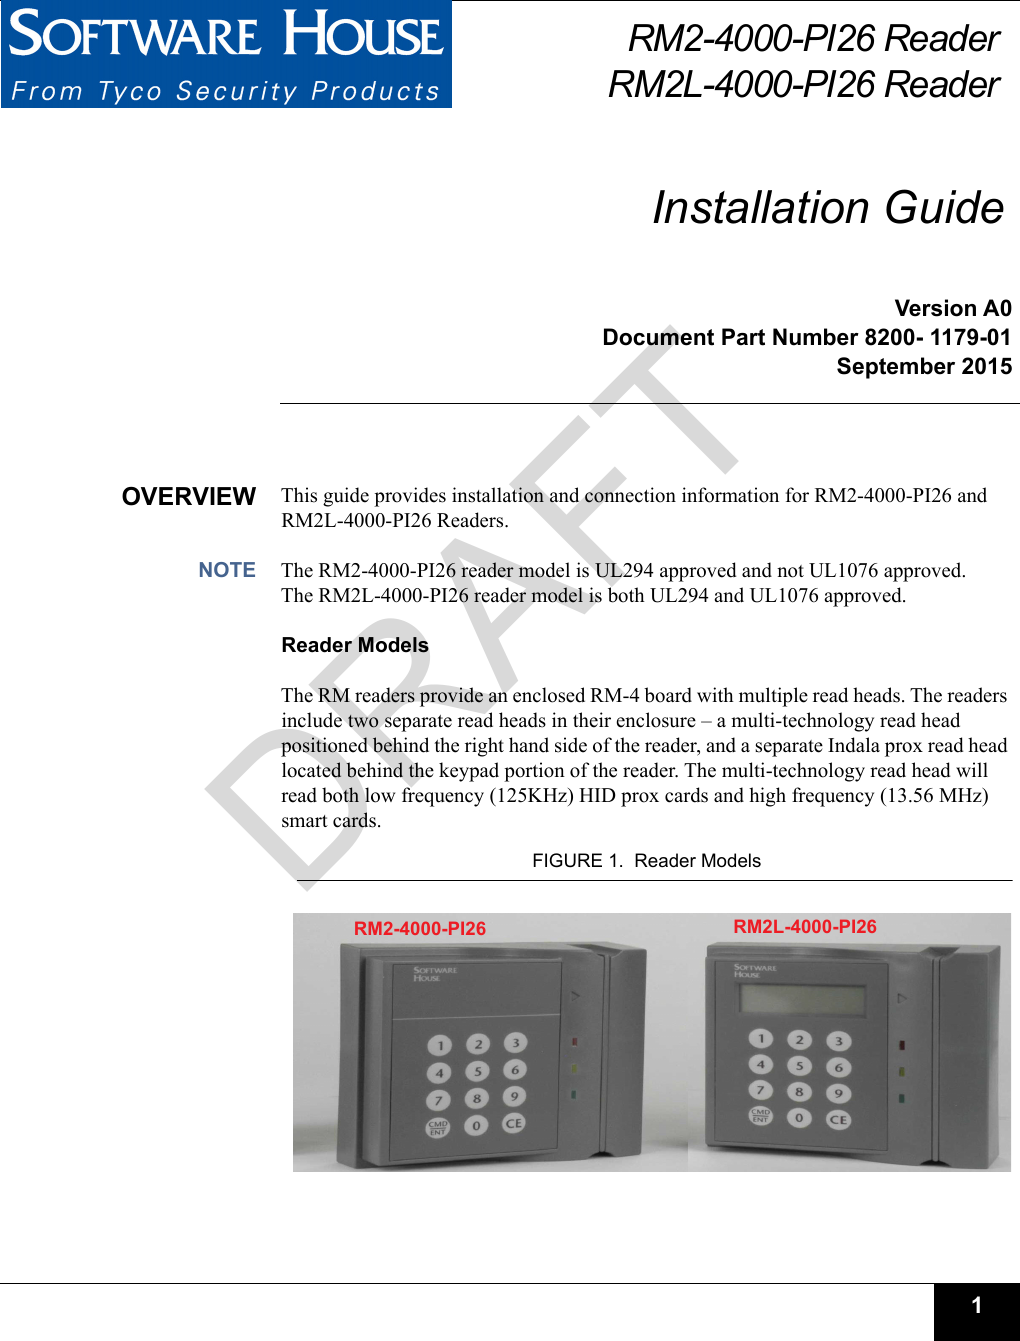 1RM2-4000-PI26 ReaderRM2L-4000-PI26 ReaderInstallation GuideVersion A0Document Part Number 8200- 1179-01September 2015OVERVIEW This guide provides installation and connection information for RM2-4000-PI26 and RM2L-4000-PI26 Readers. NOTE The RM2-4000-PI26 reader model is UL294 approved and not UL1076 approved. The RM2L-4000-PI26 reader model is both UL294 and UL1076 approved.Reader ModelsThe RM readers provide an enclosed RM-4 board with multiple read heads. The readers include two separate read heads in their enclosure – a multi-technology read head positioned behind the right hand side of the reader, and a separate Indala prox read head located behind the keypad portion of the reader. The multi-technology read head will read both low frequency (125KHz) HID prox cards and high frequency (13.56 MHz) smart cards.FIGURE 1.  Reader ModelsRM2-4000-PI26  RM2L-4000-PI26 DRAFT